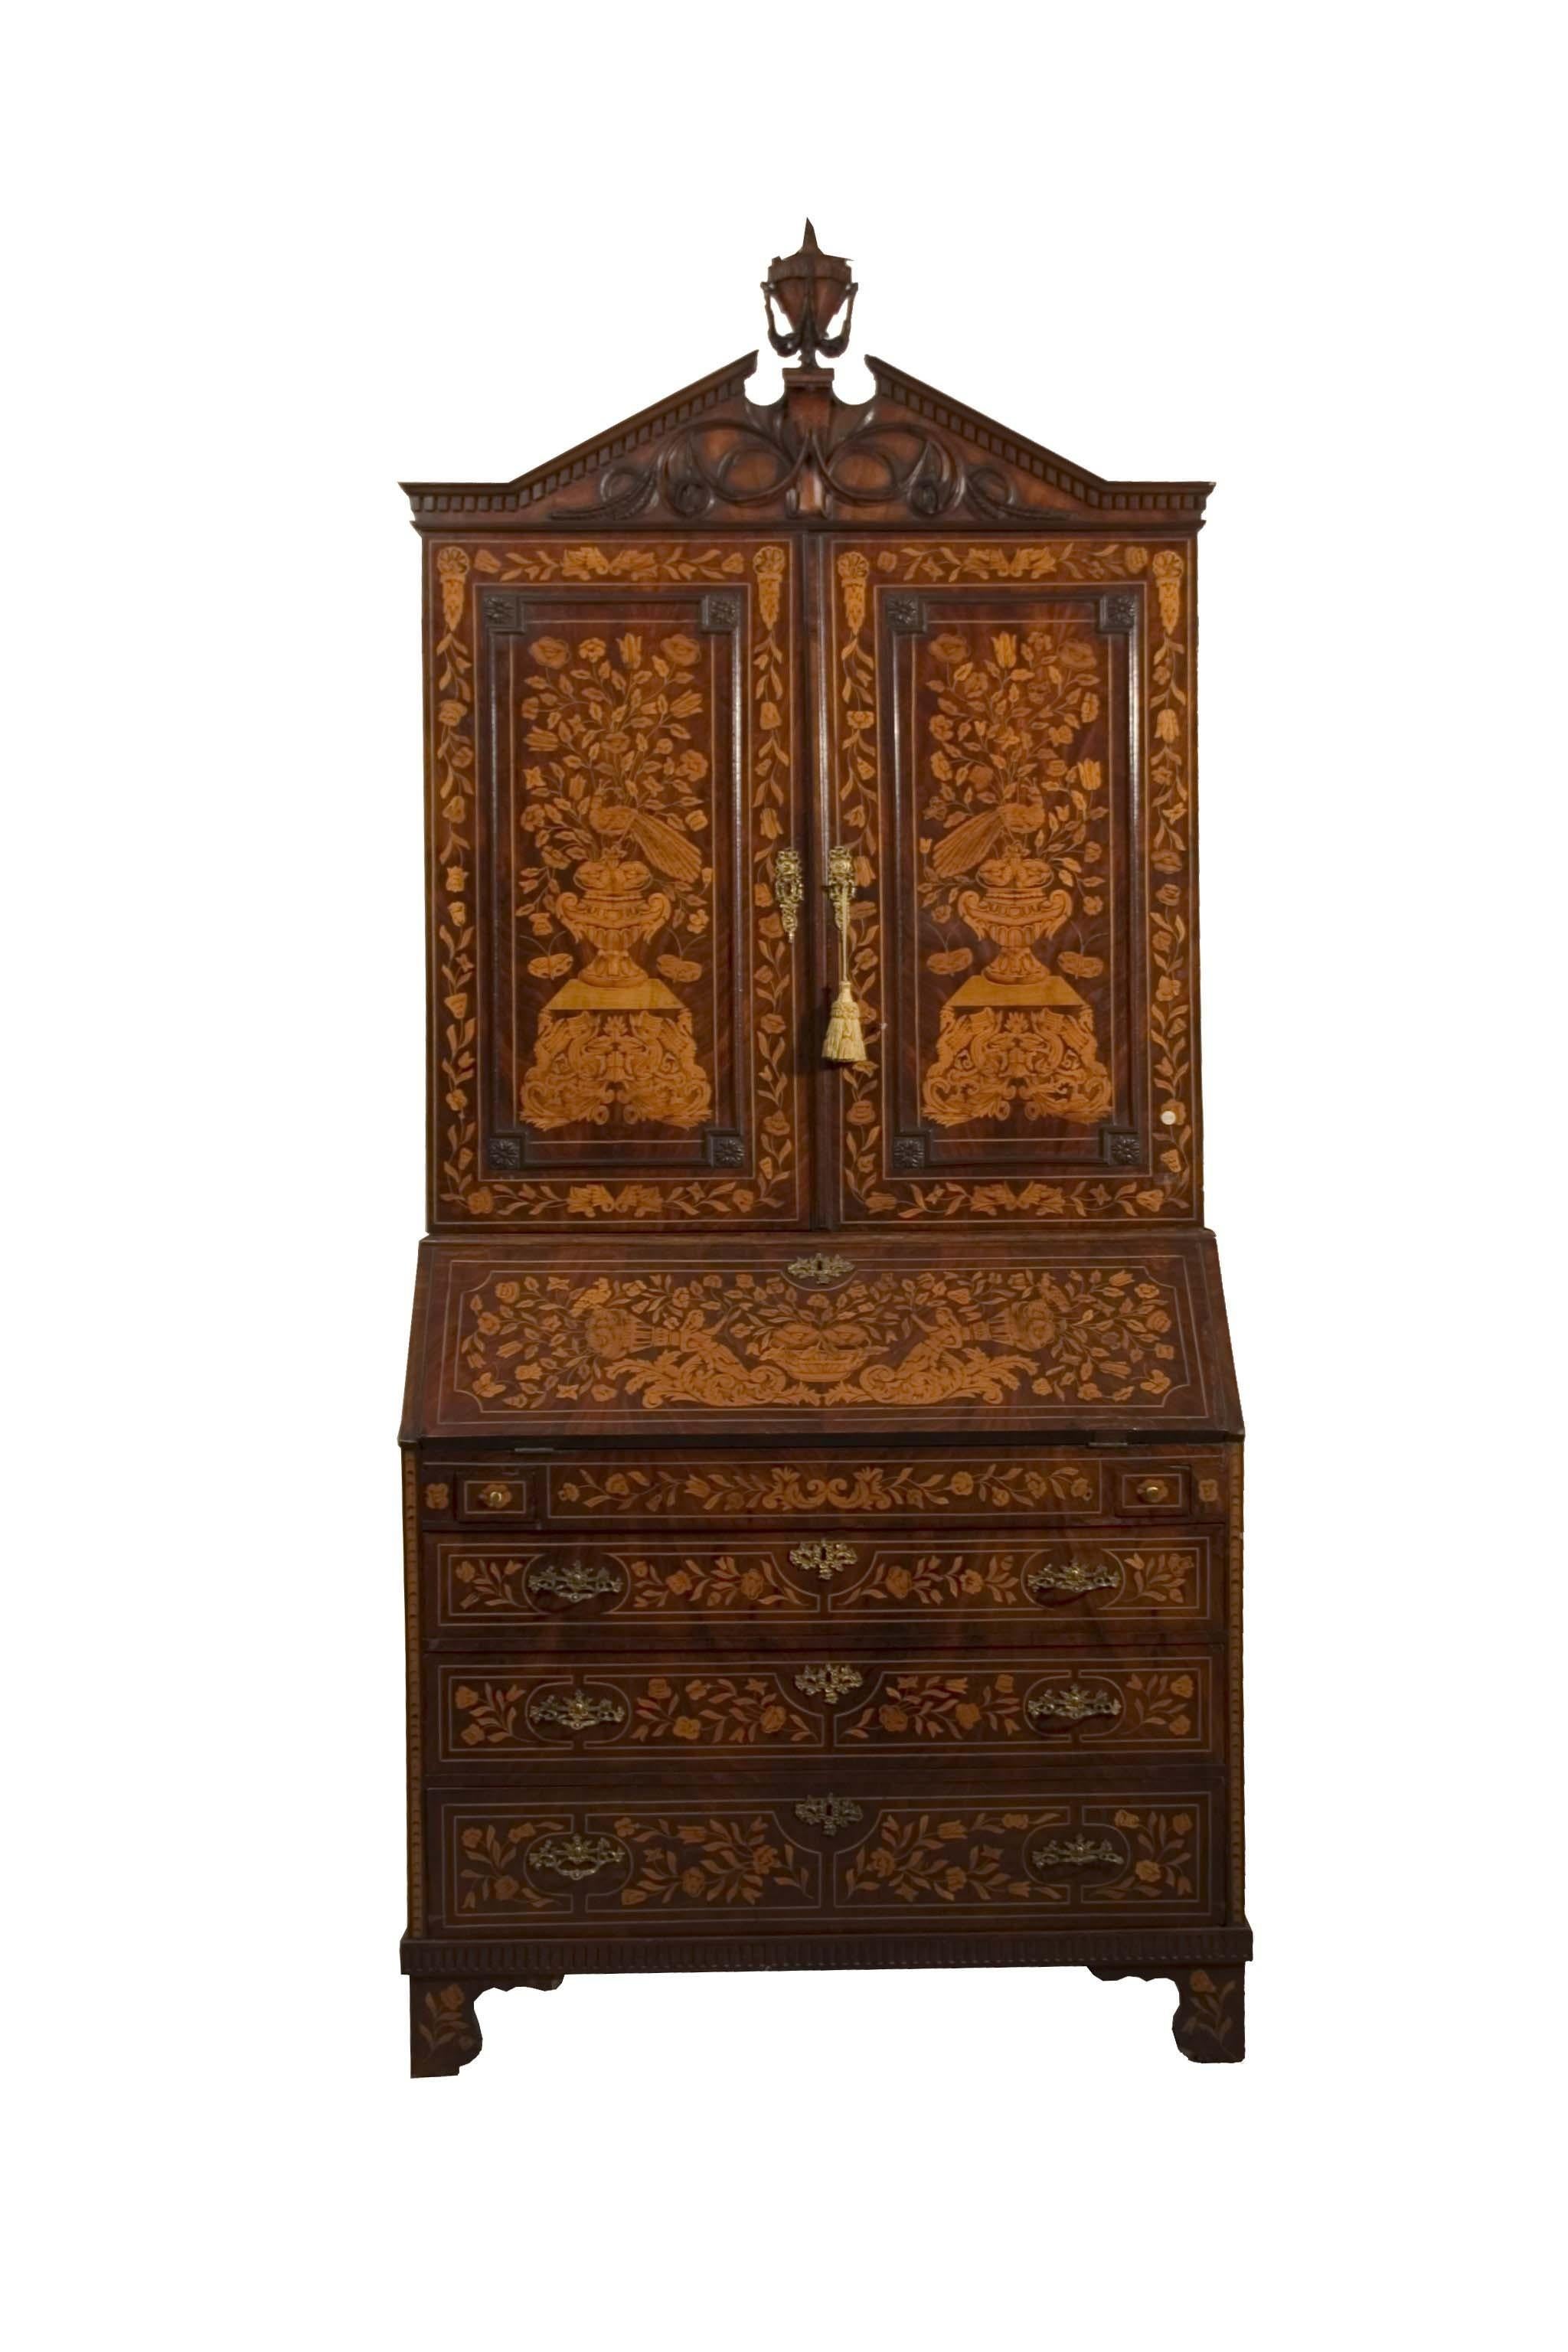 Dutch Exquisite Mahogany Feathered Trumeau, Adorned with Floral Inlays from the 1700s For Sale